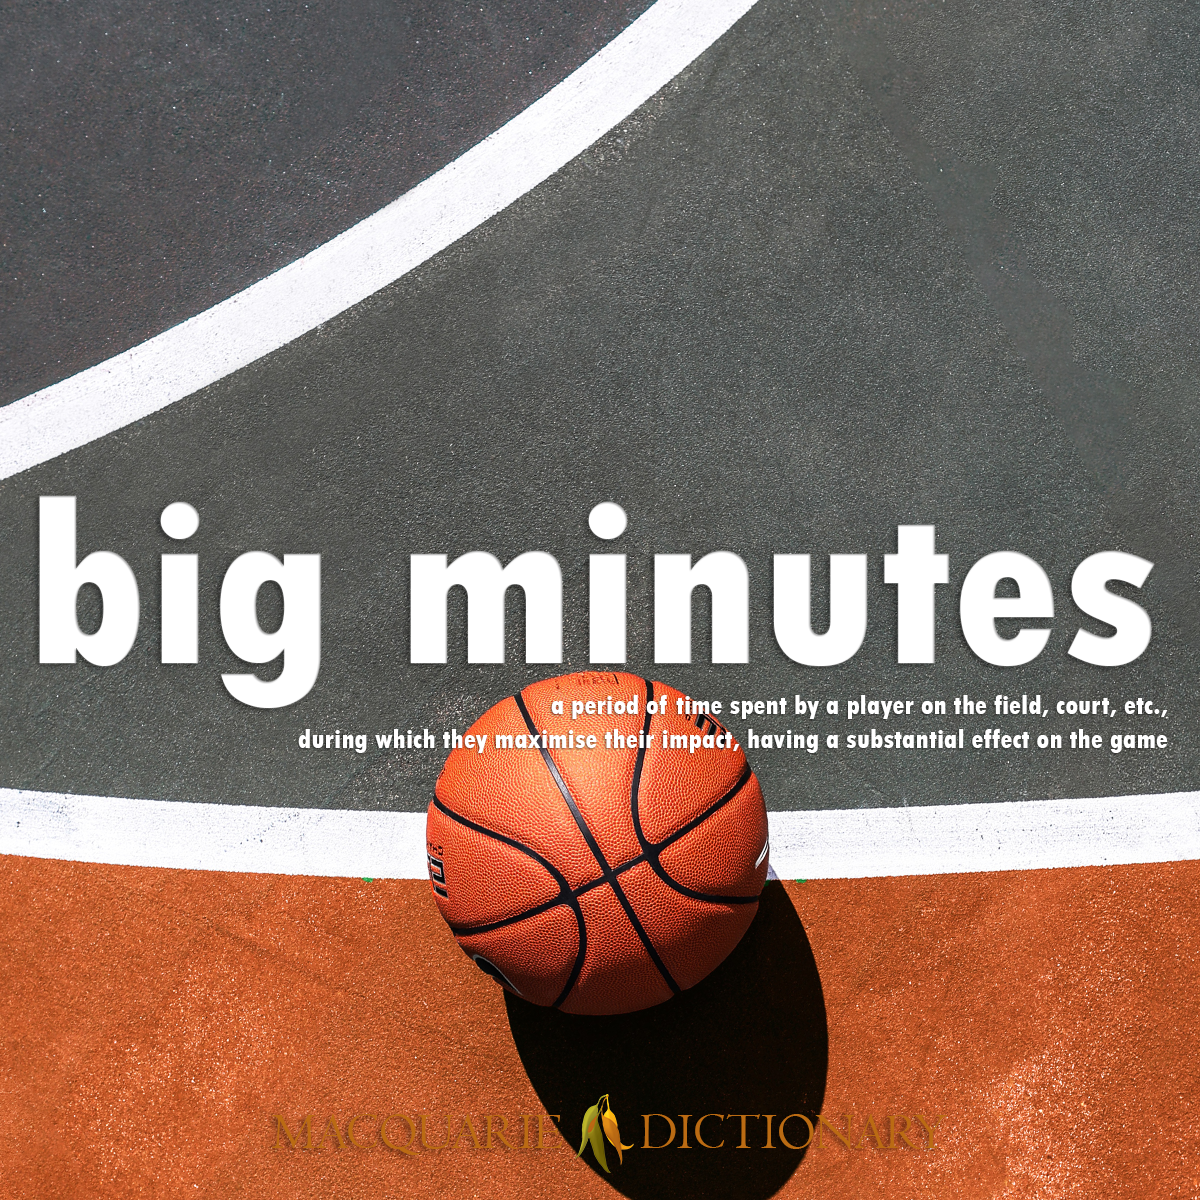 Image of Macquarie Dictionary Word of the Year - big minutes - a period of time spent by a player on the field, court, etc., during which they maximise their impact, having a substantial effect on the game